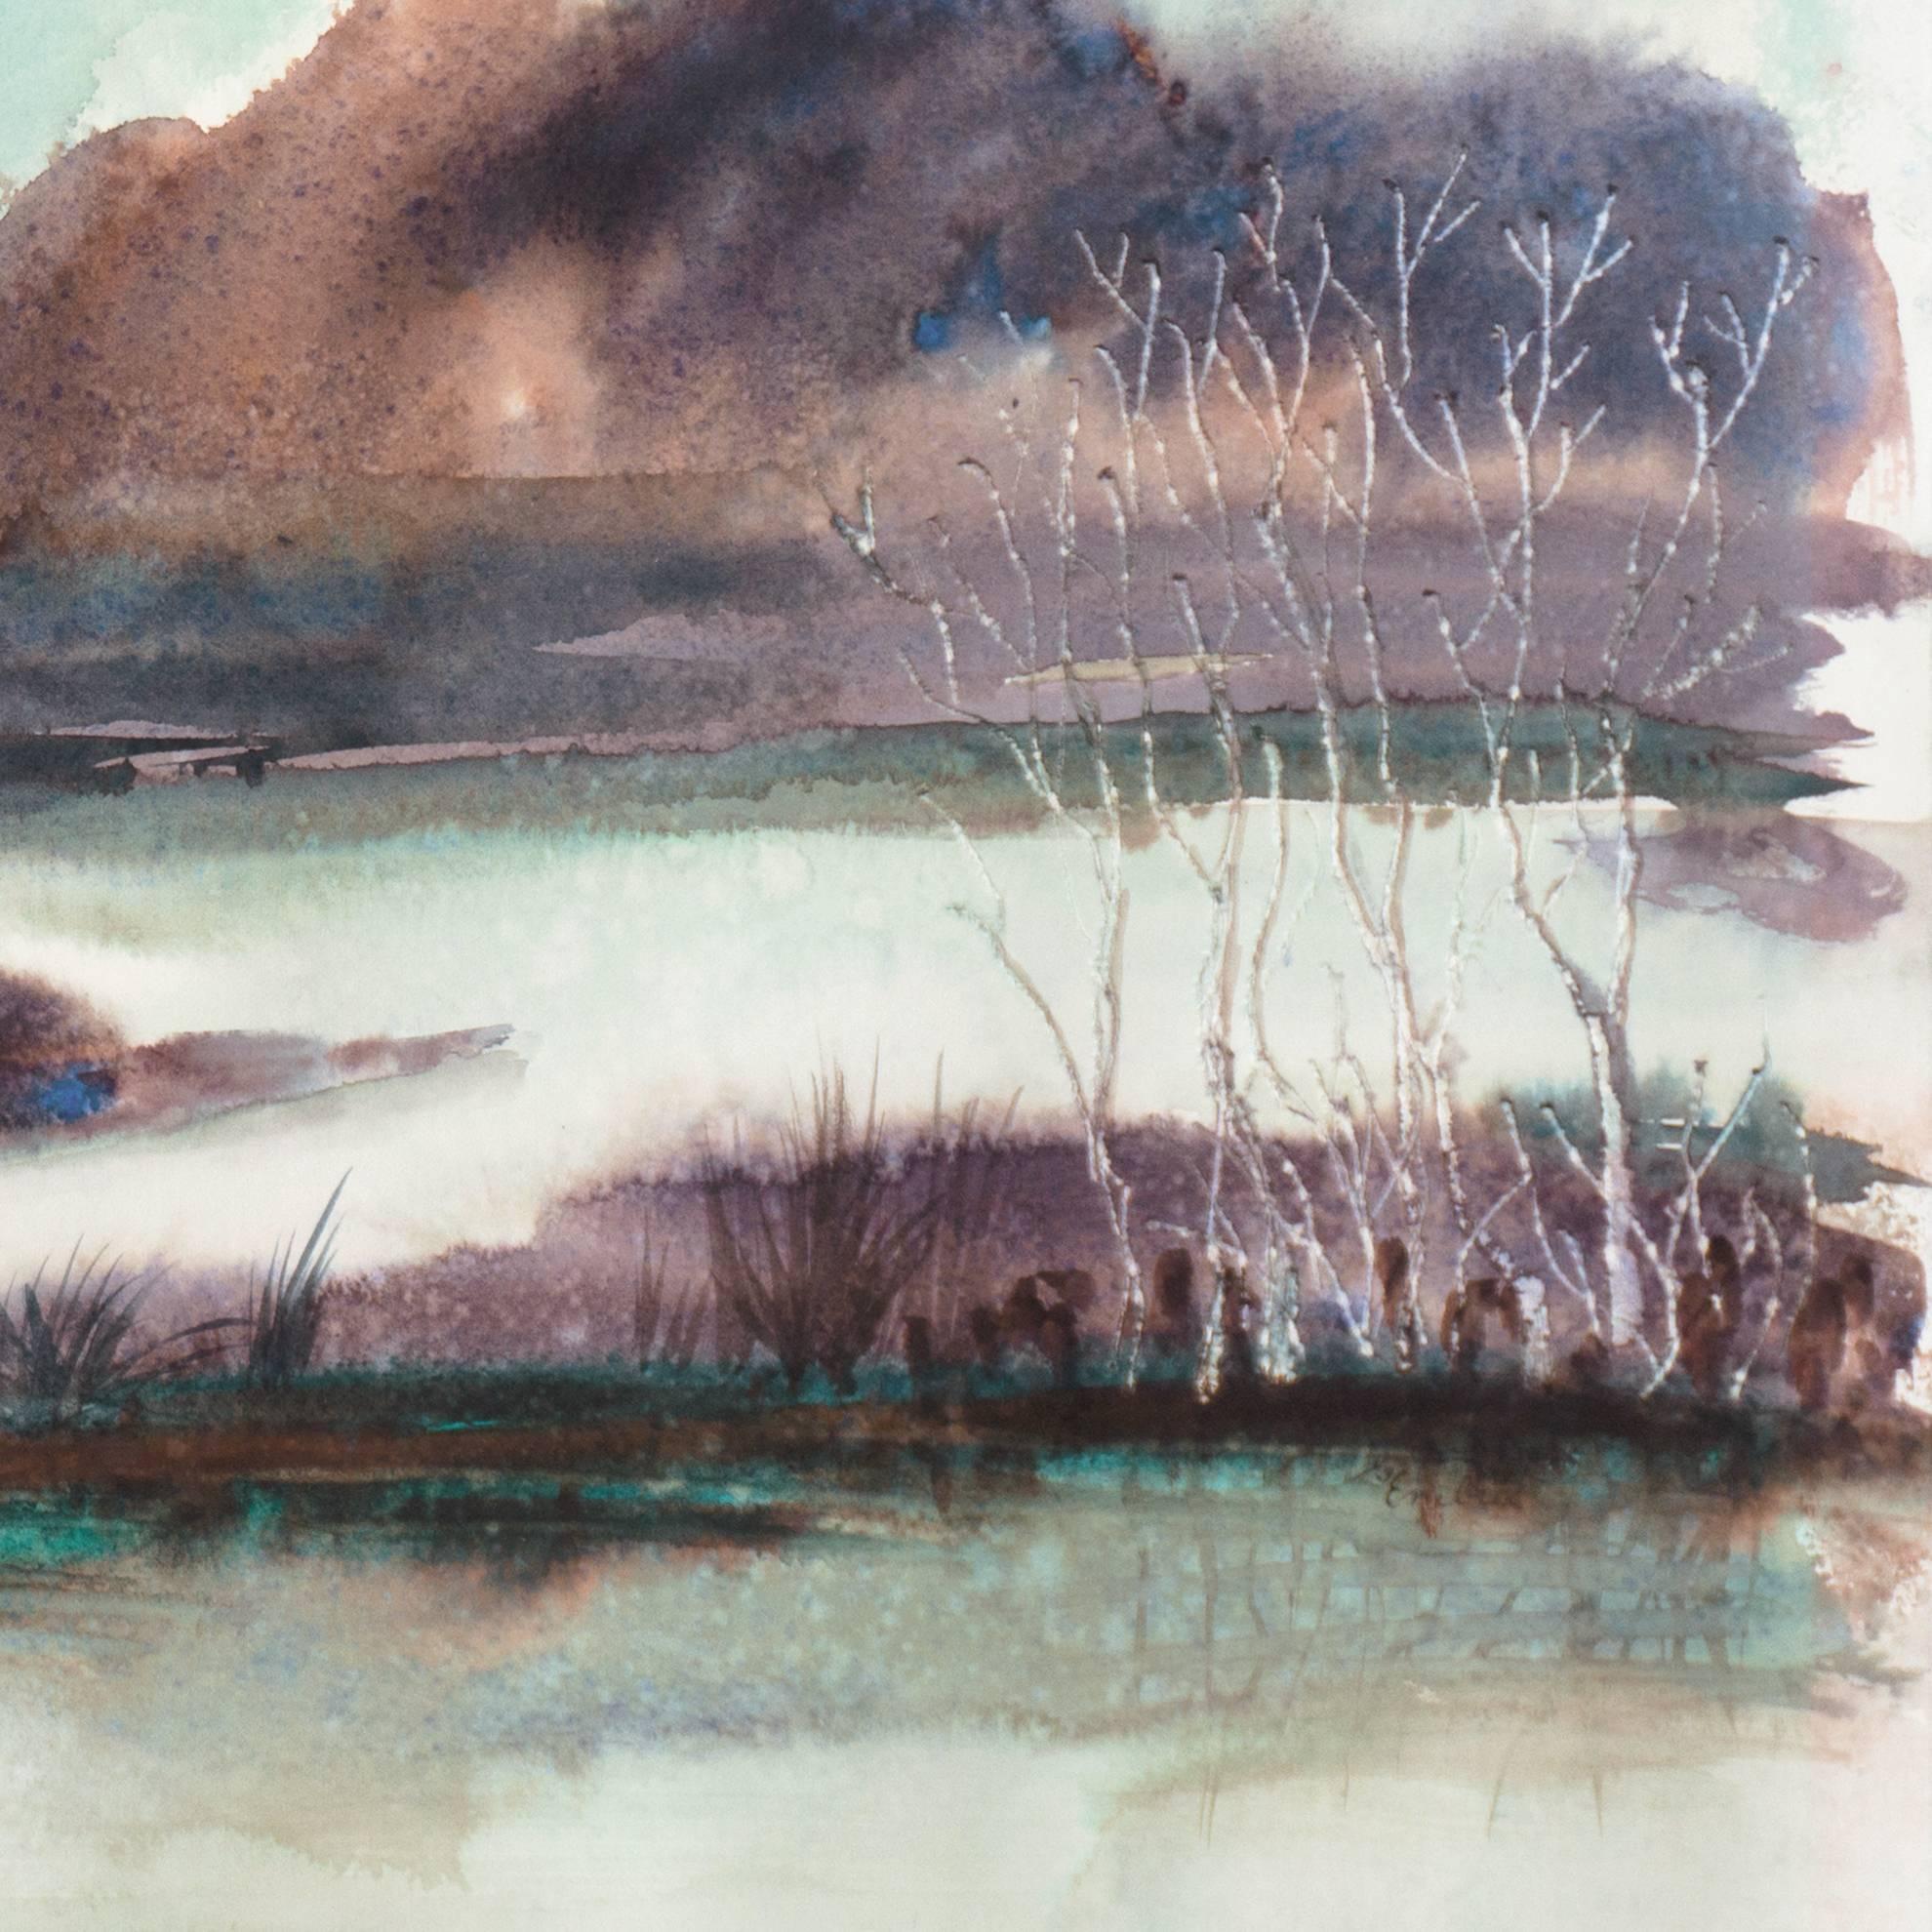 Inscribed verso, 'Gisela Embree' and Titled 'Rain'.

Born in Germany in 1927, Gisela Embree immigrated to the United States in 1948. She began to study Chinese brush painting in 1975, and it became her artistic focus for the rest of her life. Embree